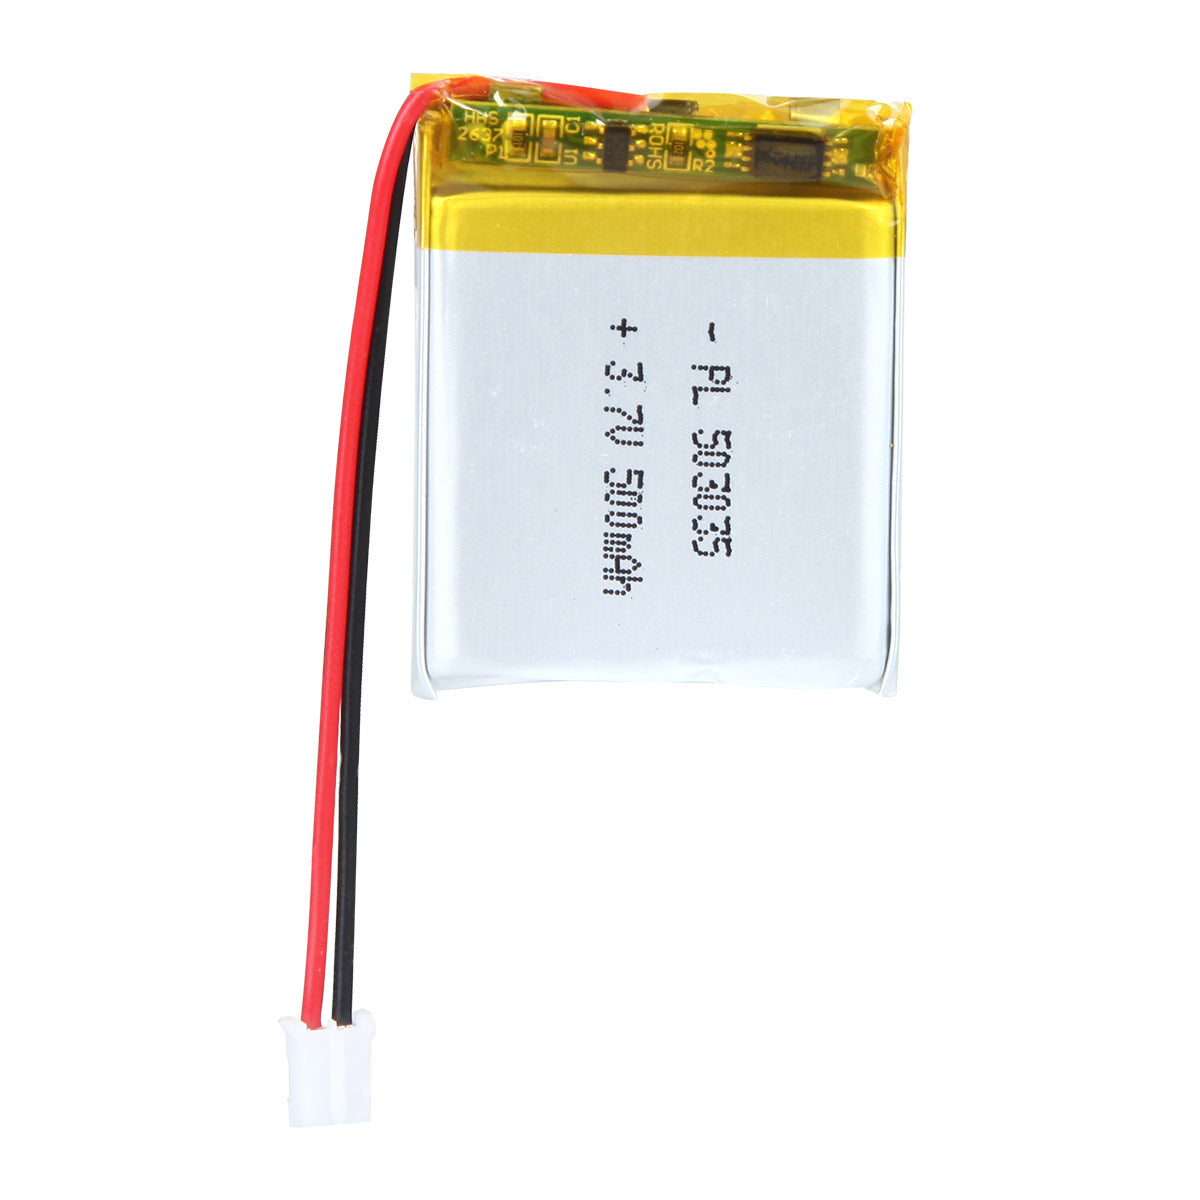 YDL 3.7V 500mAh 503035 Rechargeable Lithium Polymer Battery Length 37mm